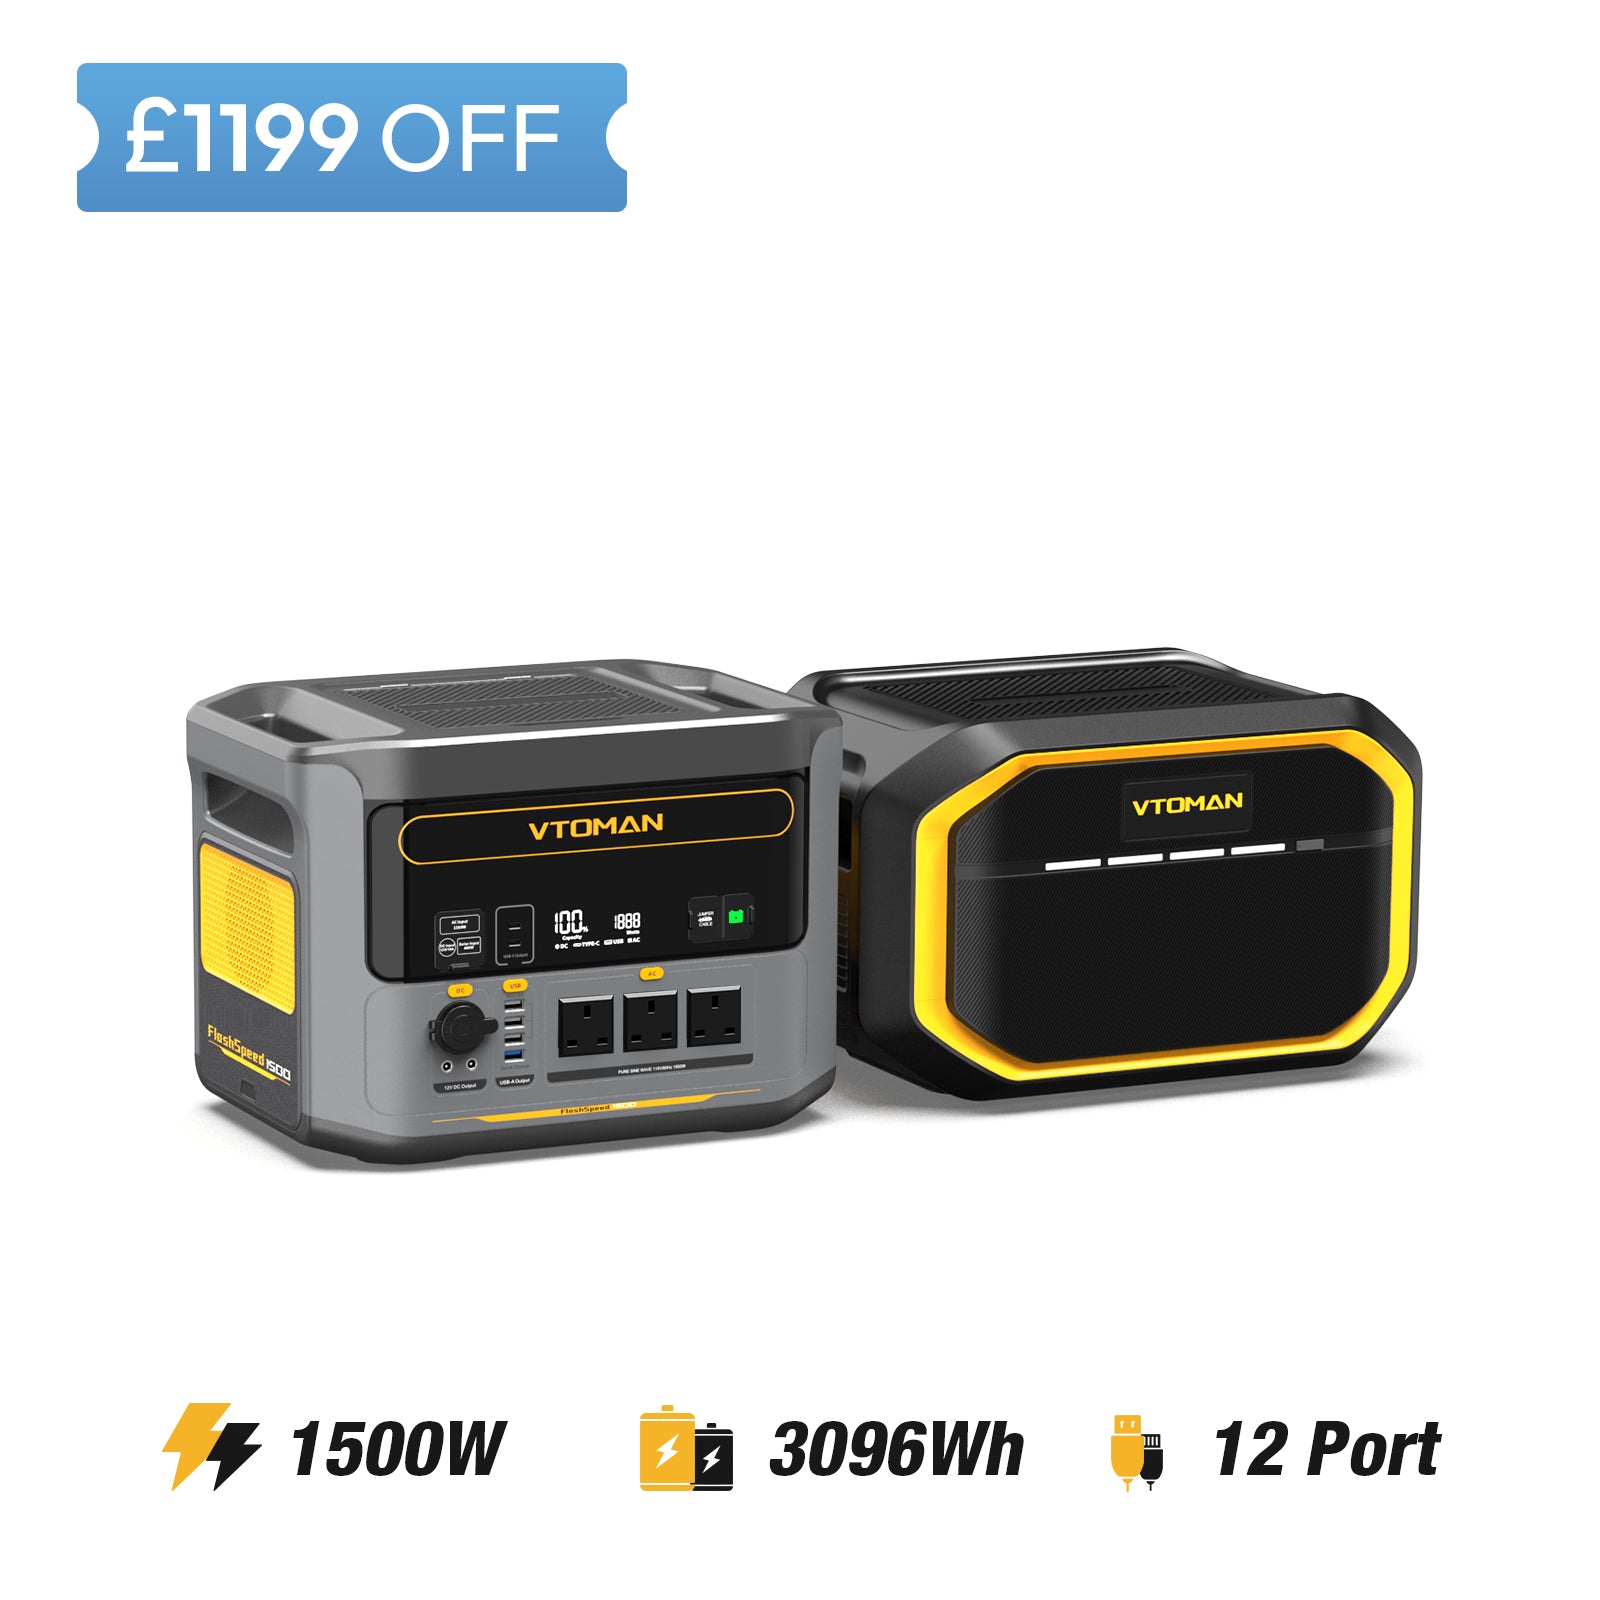 FlashSpeed 1500 and 1548Wh extra battery save £1199 in summer sale